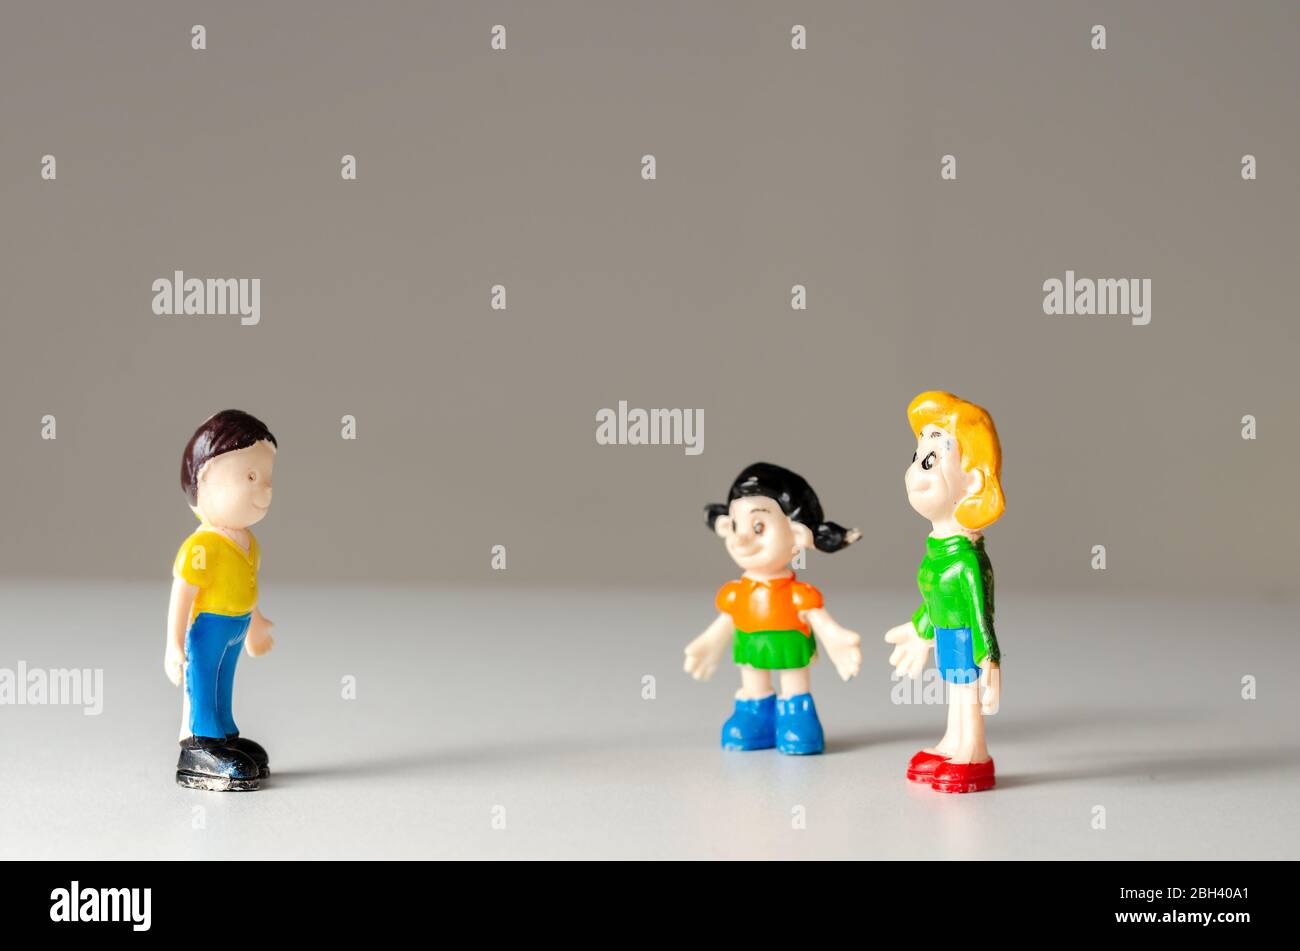 Toys figurines man and woman talking from a distance for fear of coronavirus contamination. Prevention of disease transmission . Stock Photo